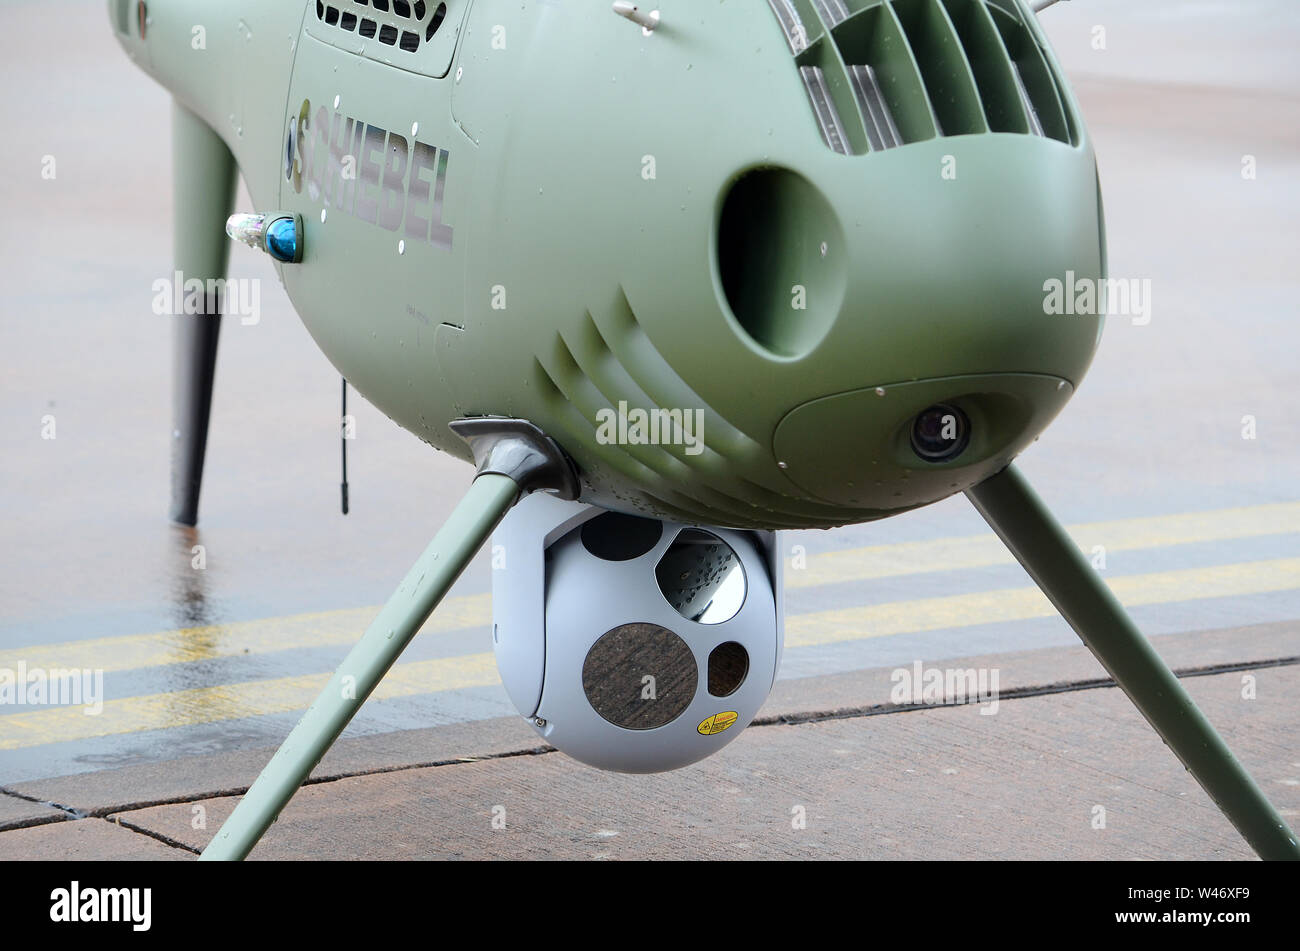 Camcopter, S-100, military drone Stock Photo